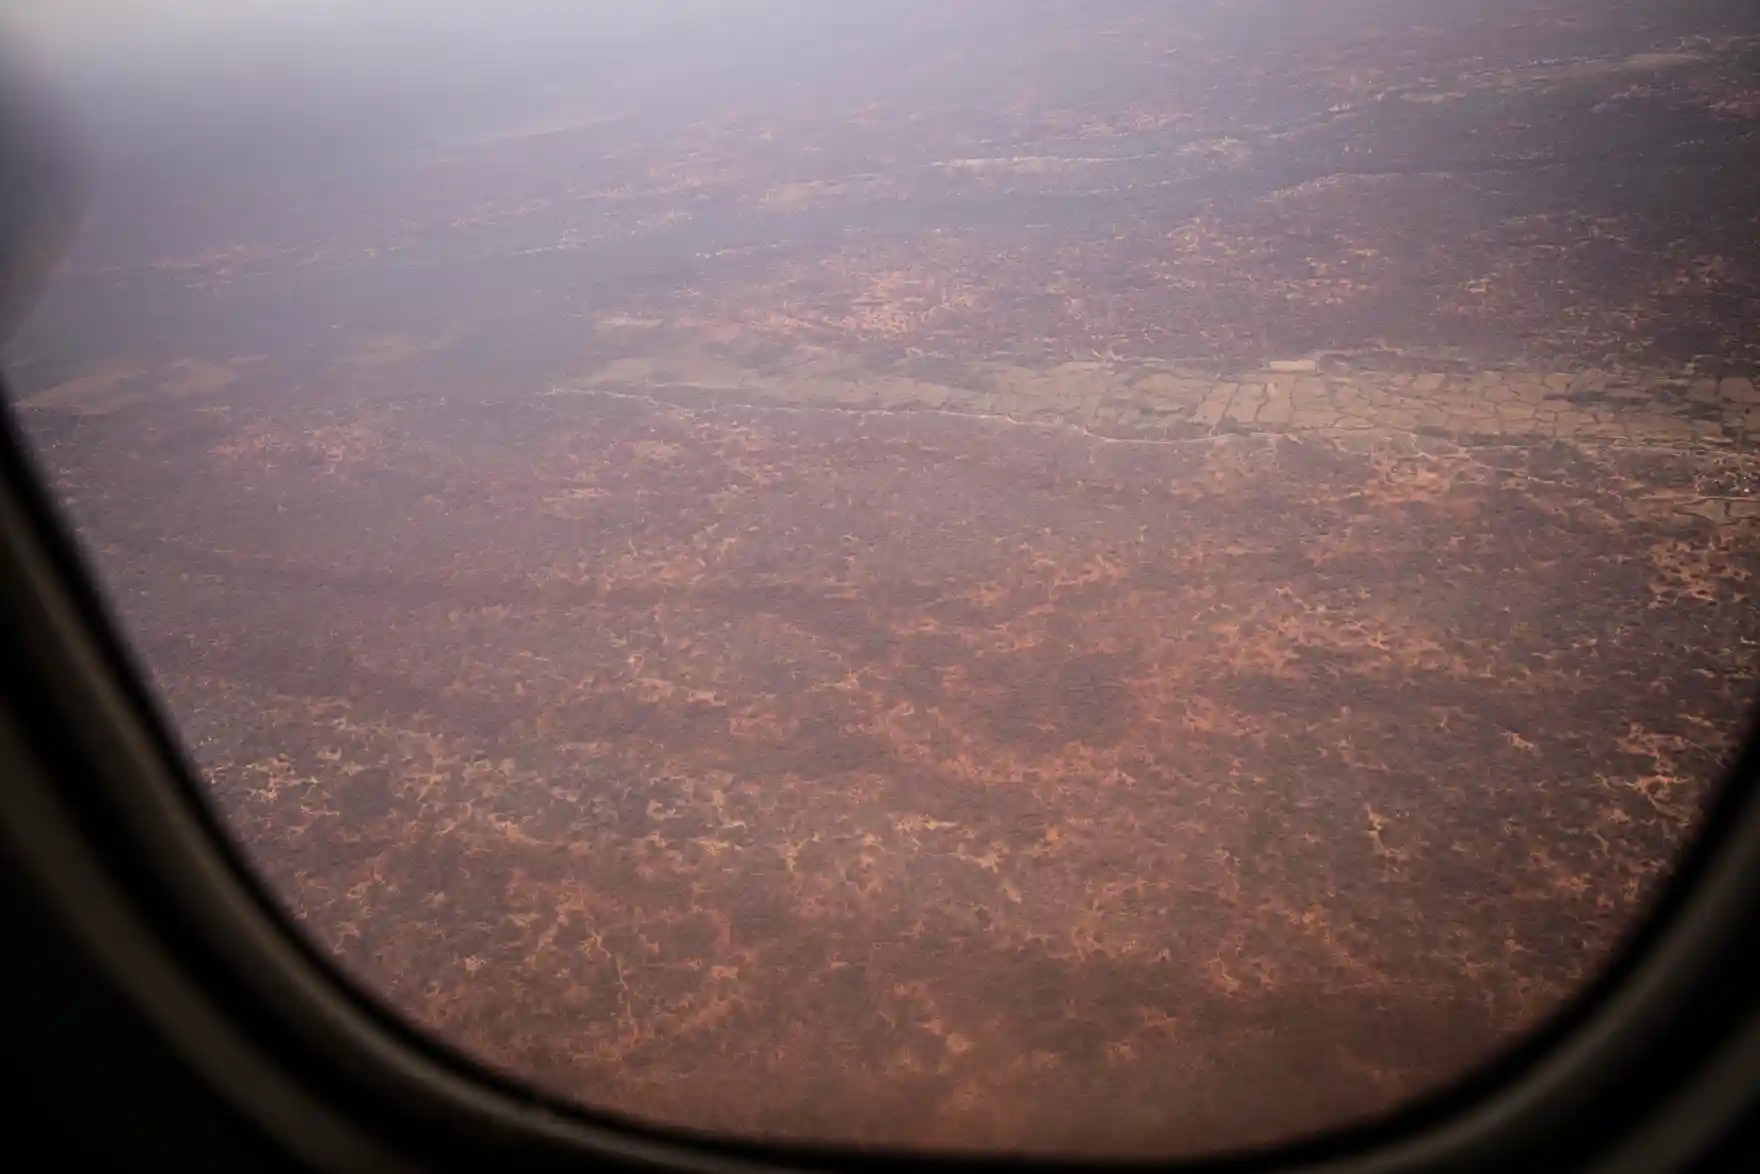 Areas of Somalia affected by the worst drought in four decades seen from a plane. Photo: Ed Ram / Getty